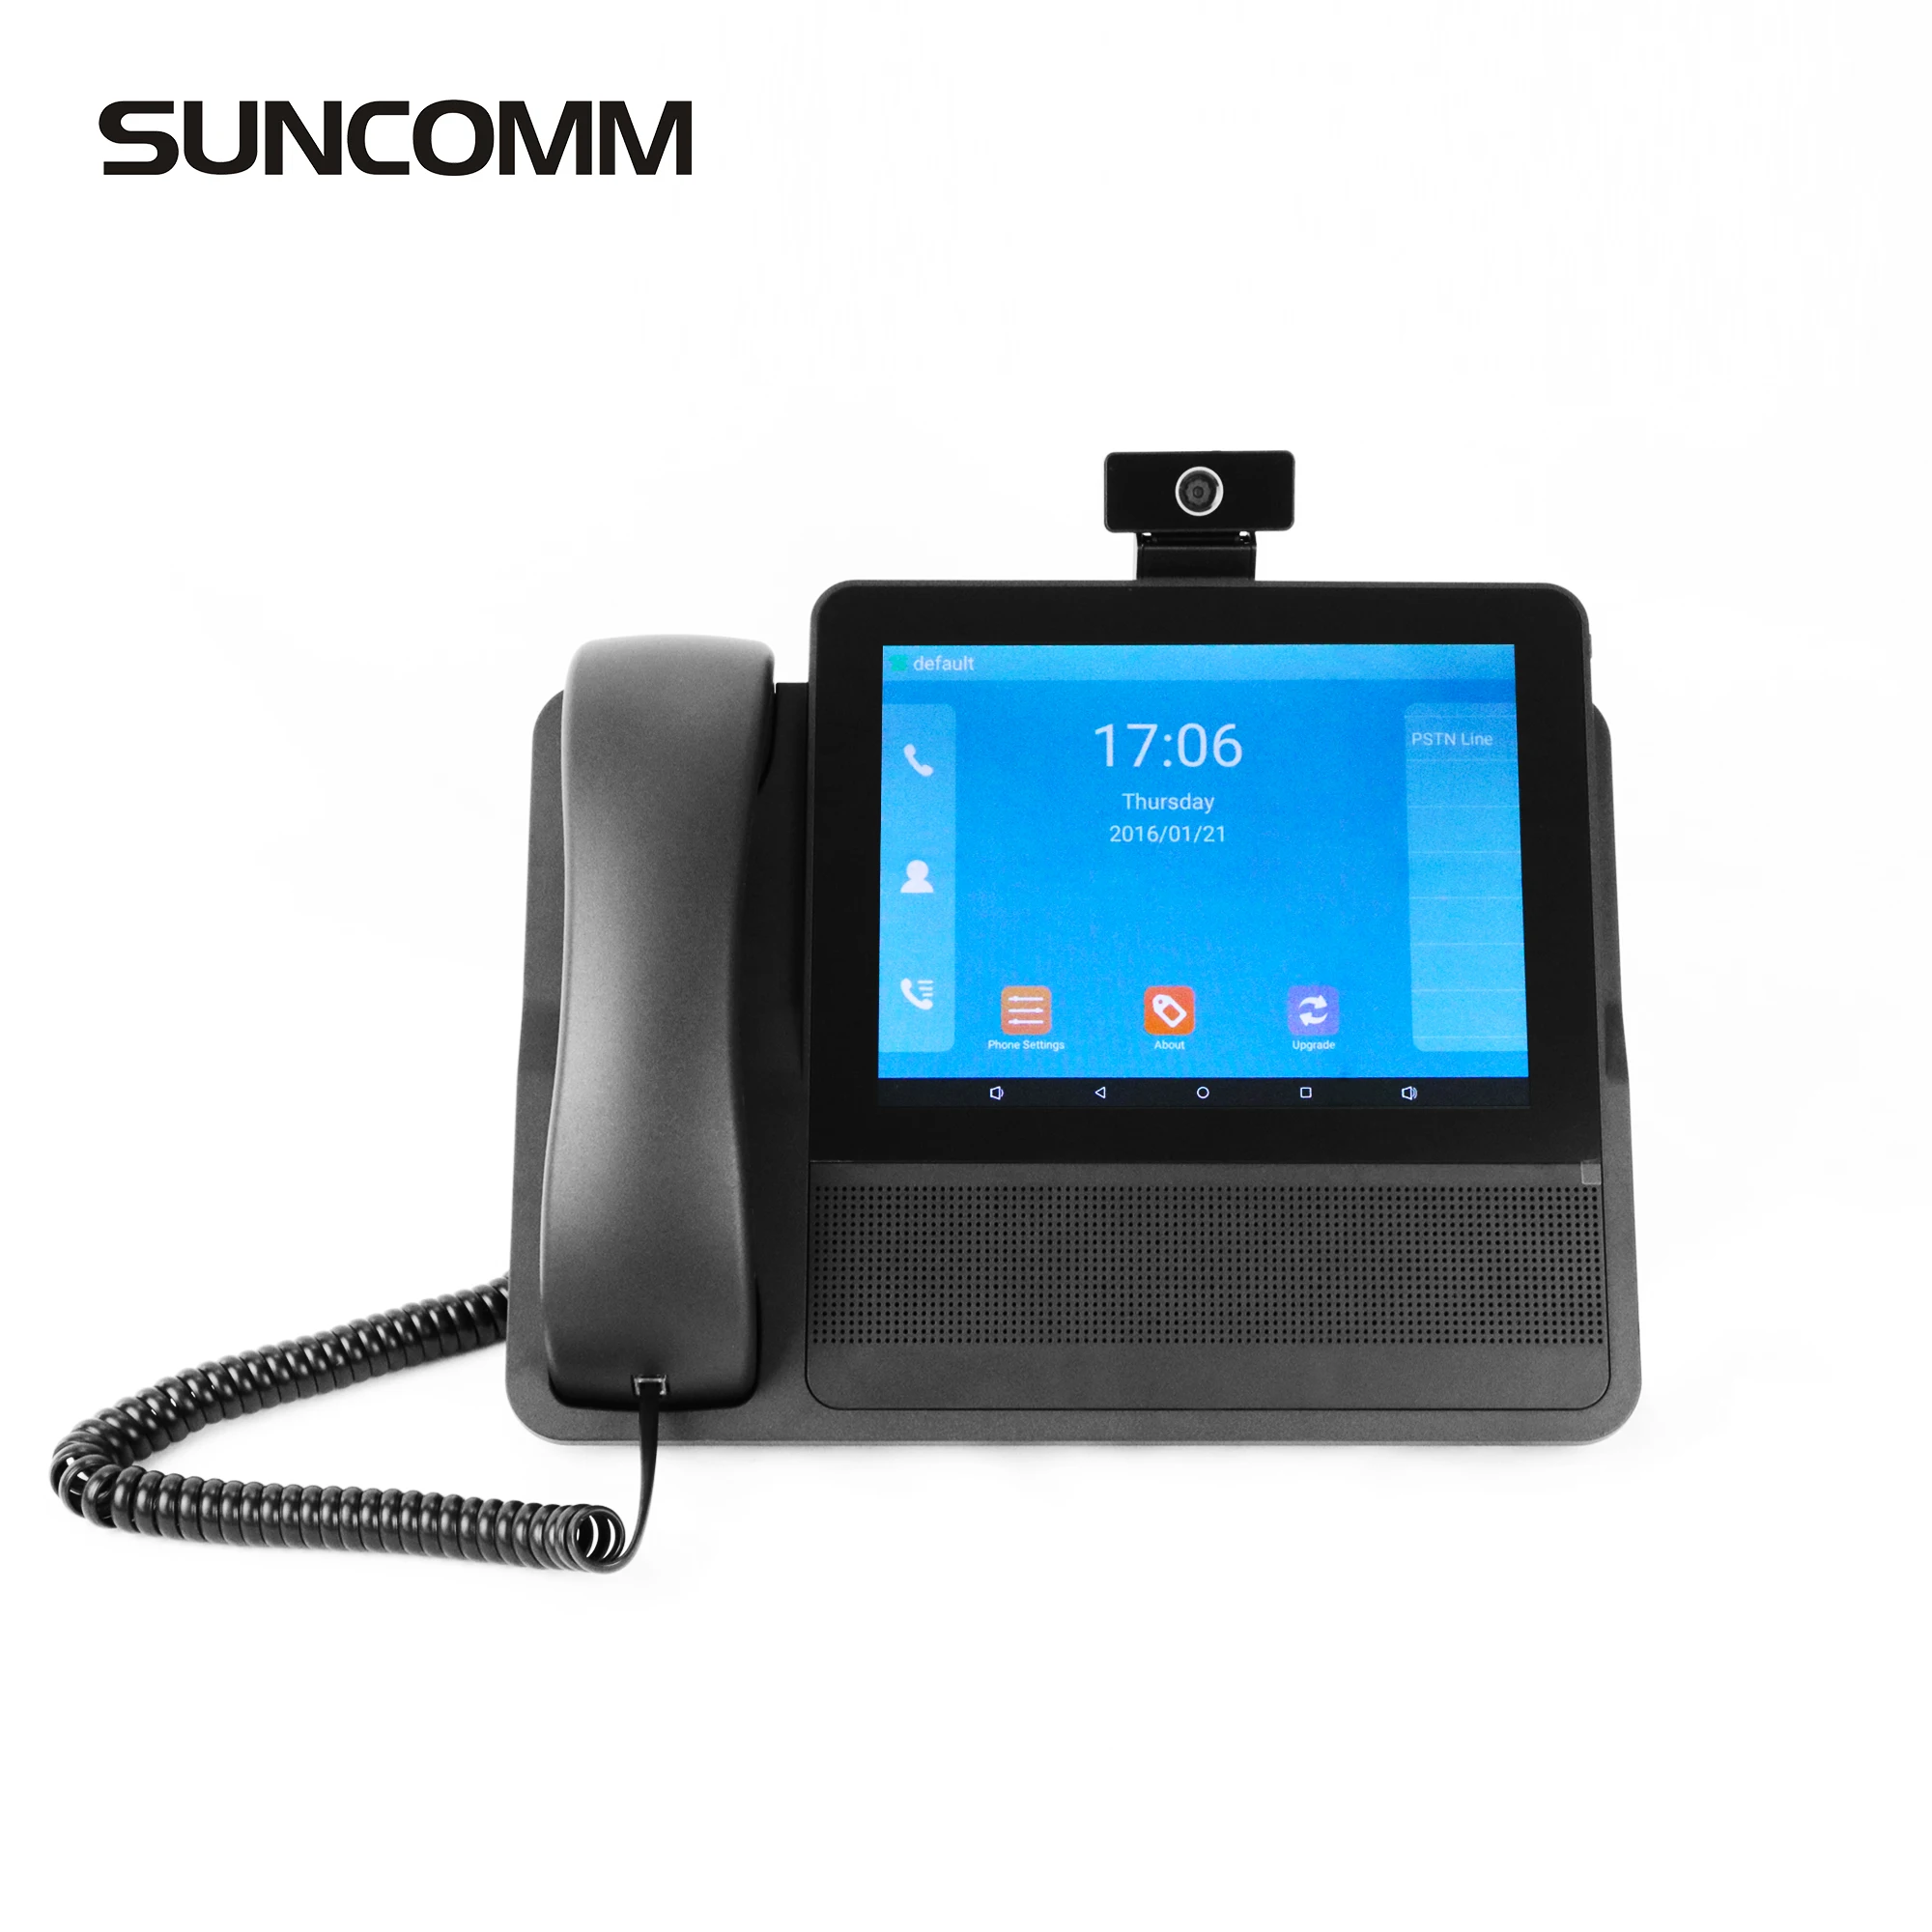 voip telephone wifi android 8 inch